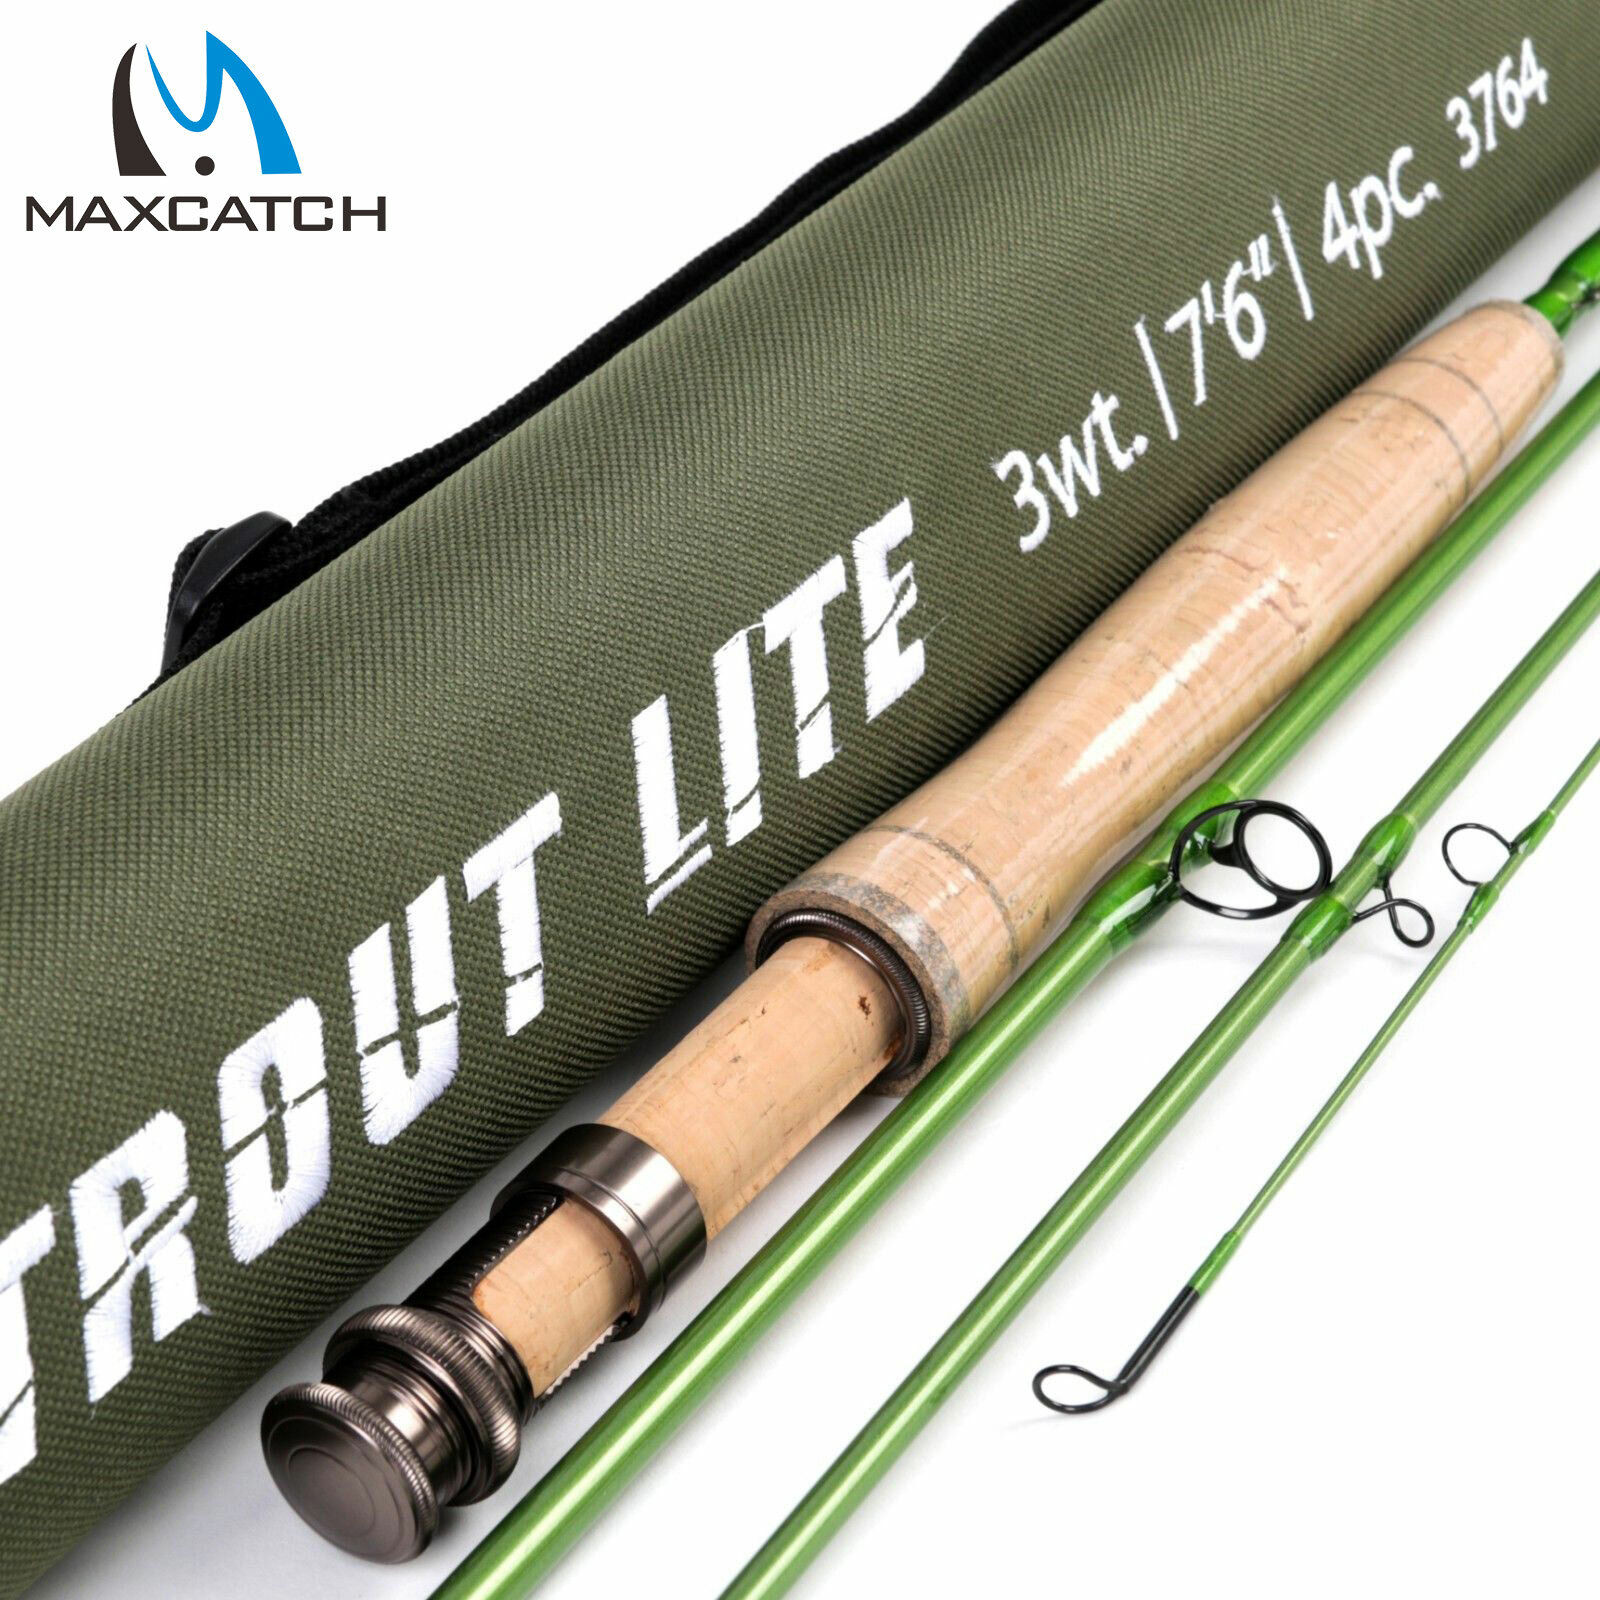 Maxcatch Trout Lite Fly Fishing Rod 3/4/5wt IM12 Carbon For the trout  angler